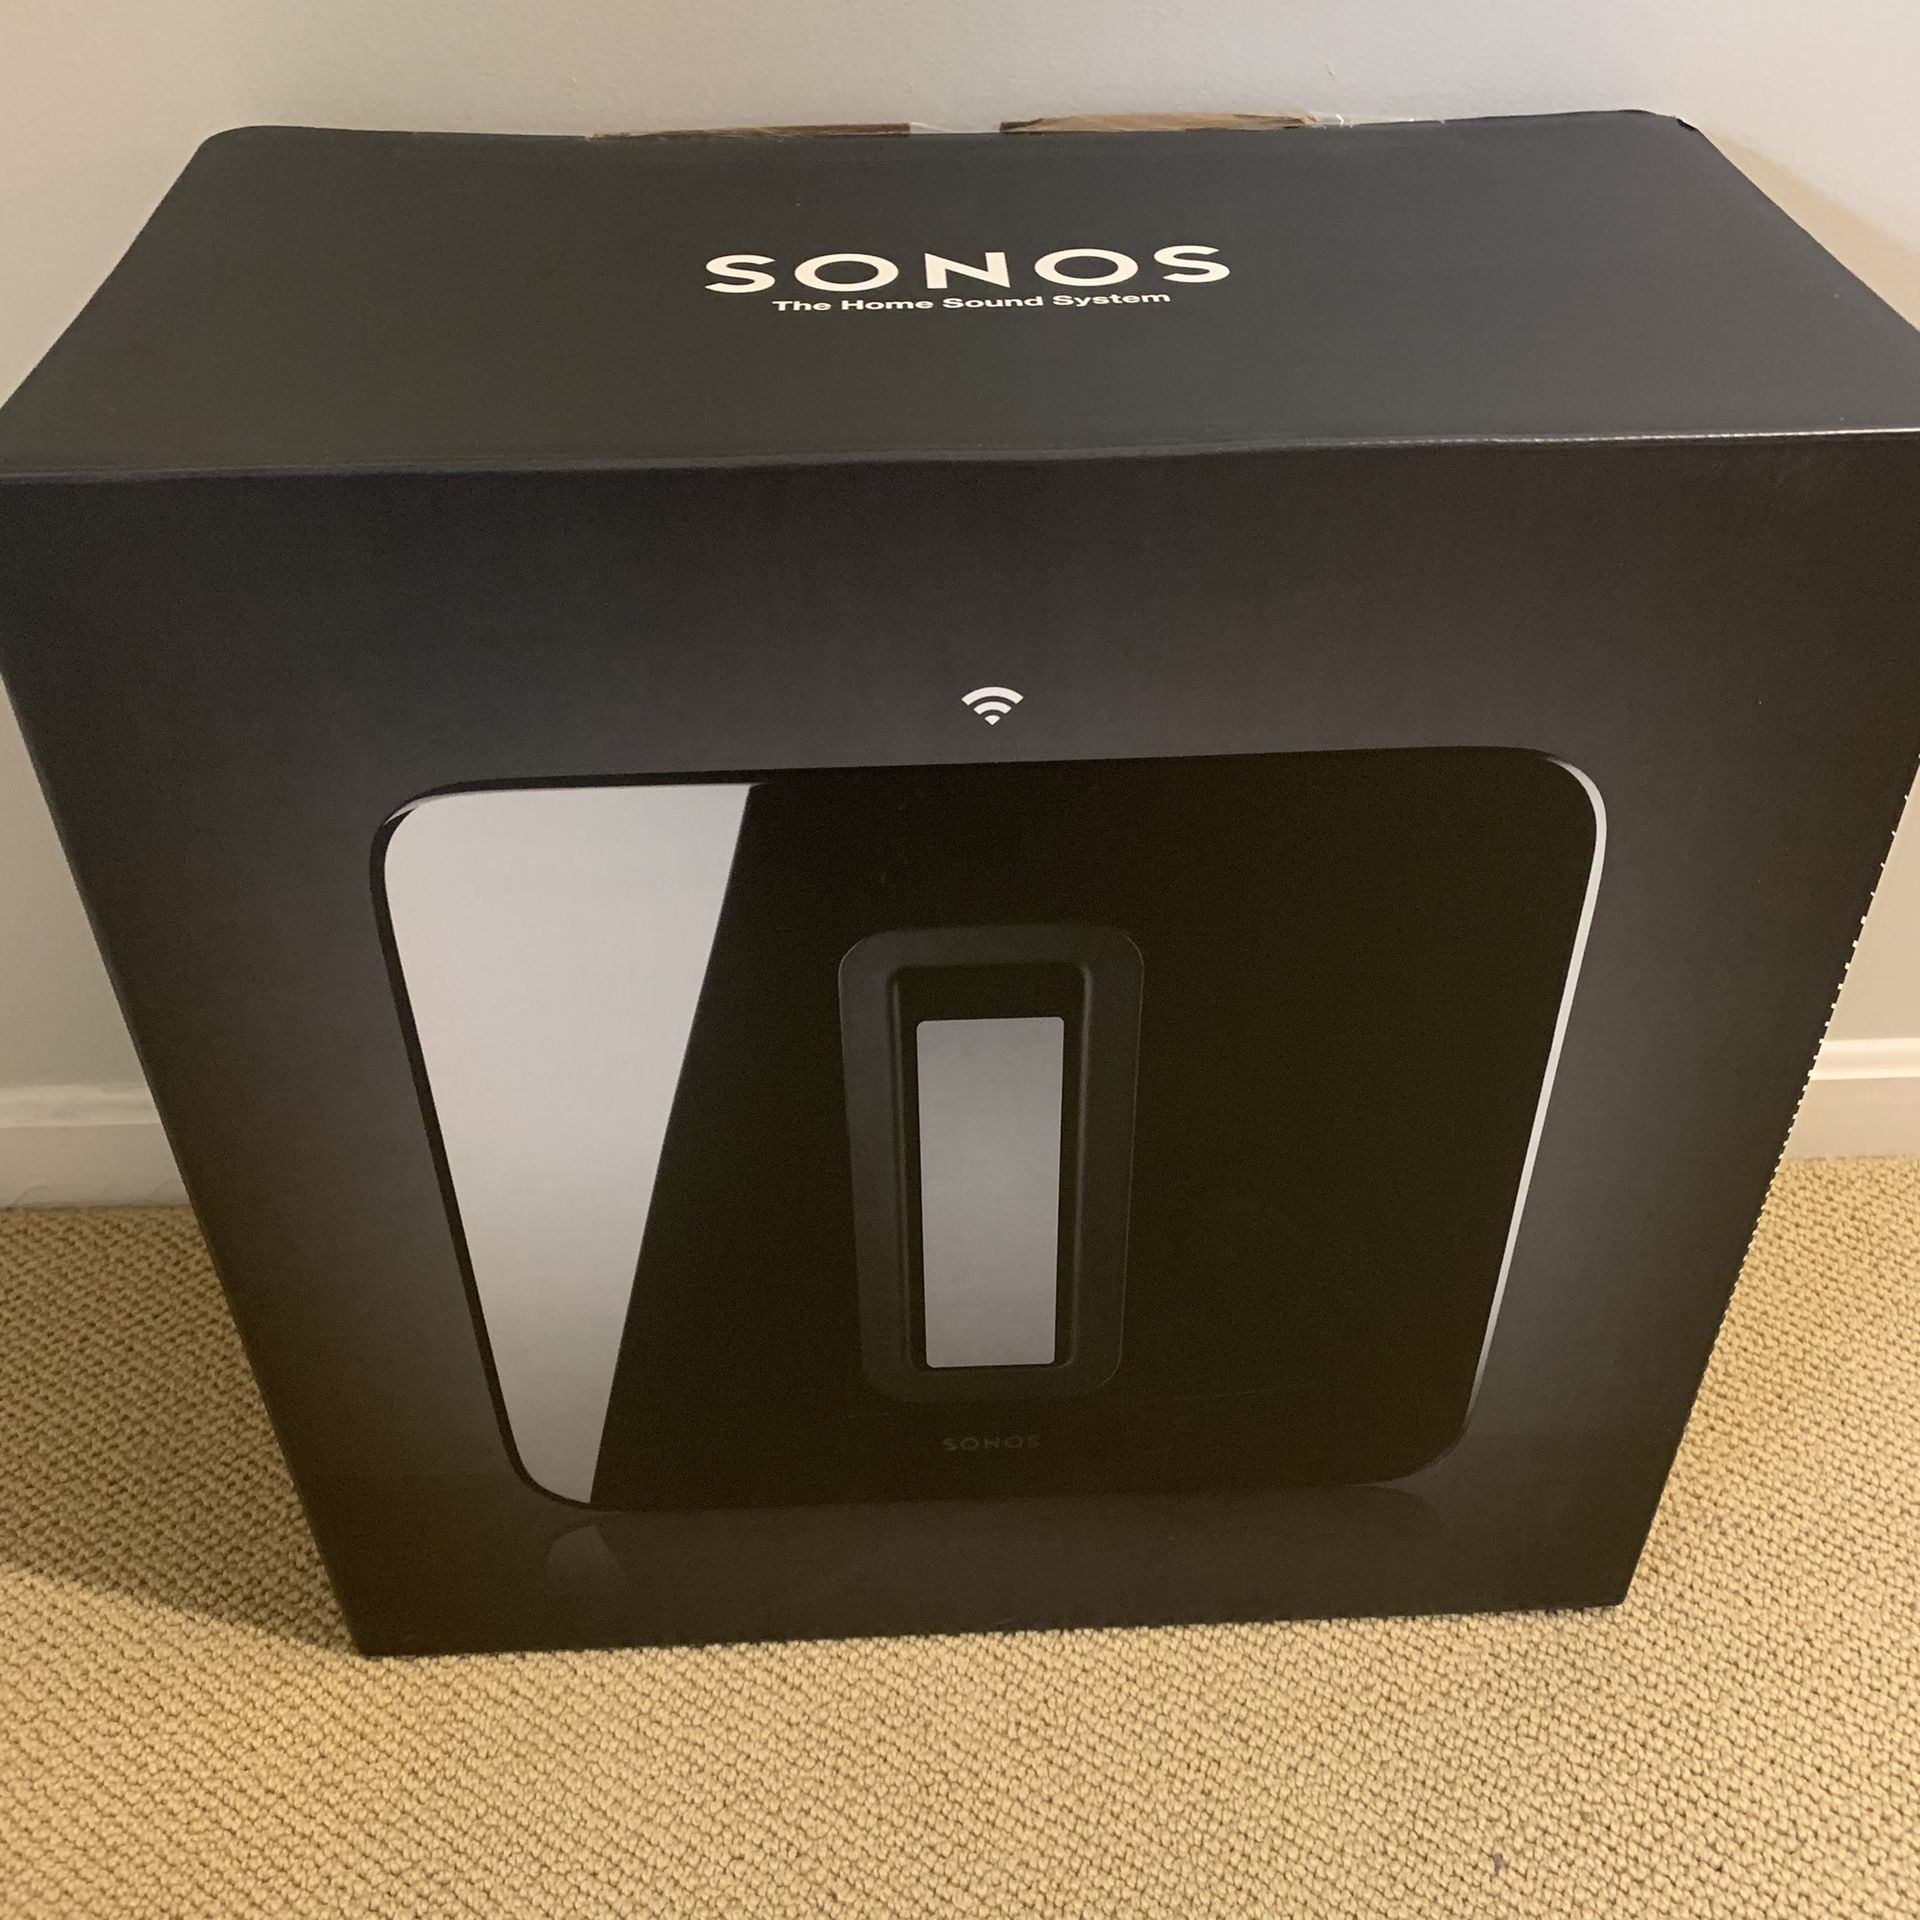 NEW Sonos Sub, brand new in box! Retails for $700.